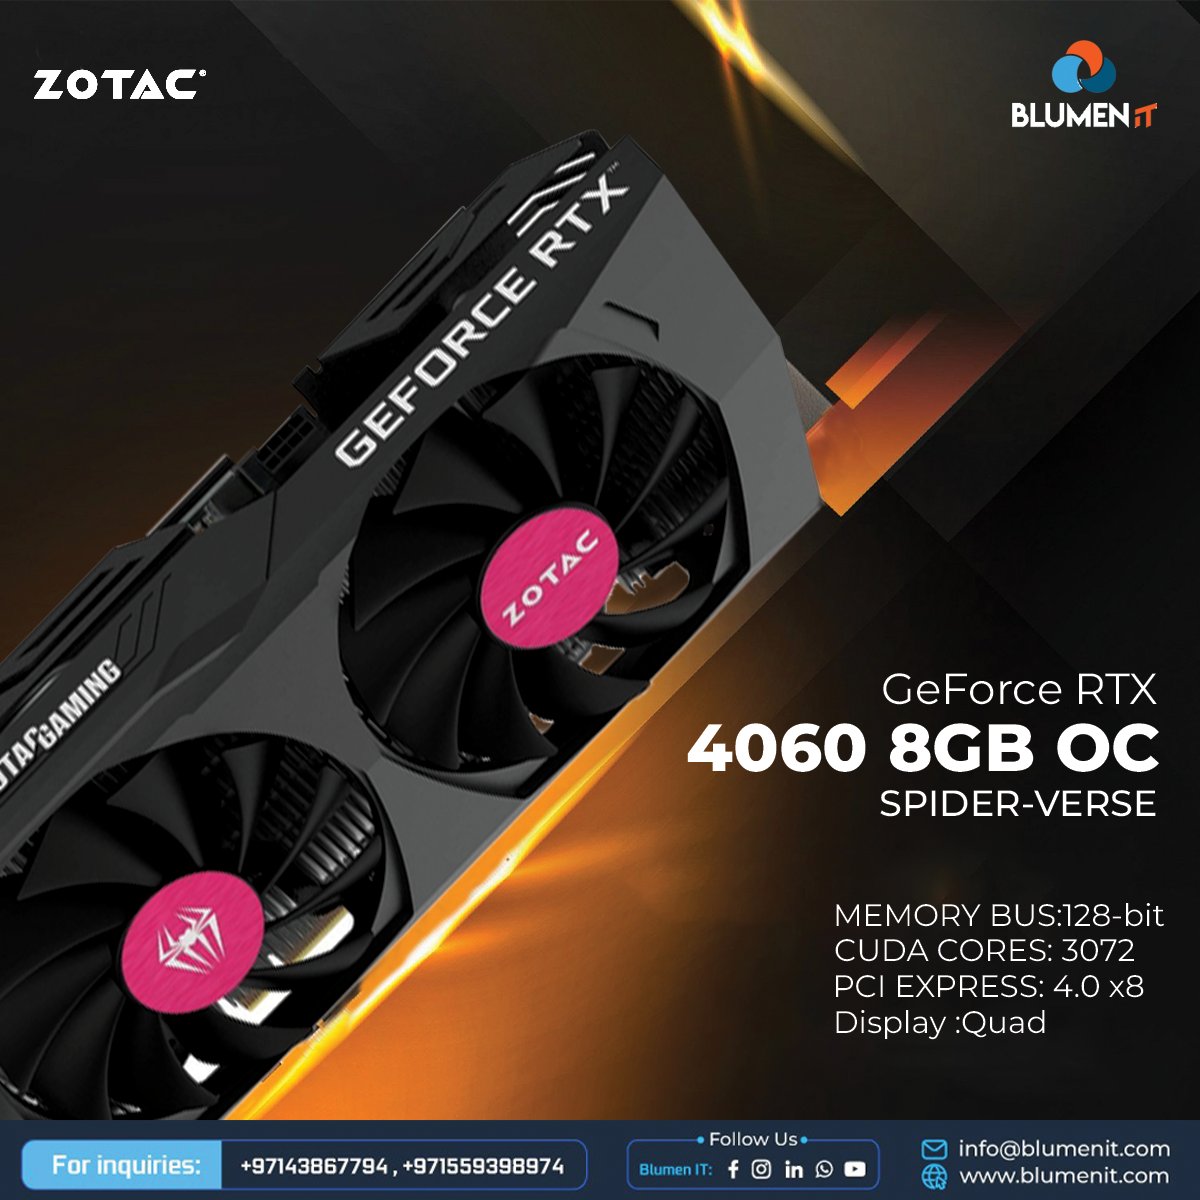 #computeraccessories #gamingprocessor #motherboard #processor #gamingmonitor #asusmonitor #asus #computer #uaegamers #Intel #dubaigamers #computeraccessories #topgamers #speed #gamingchair #chairyoga #cougar